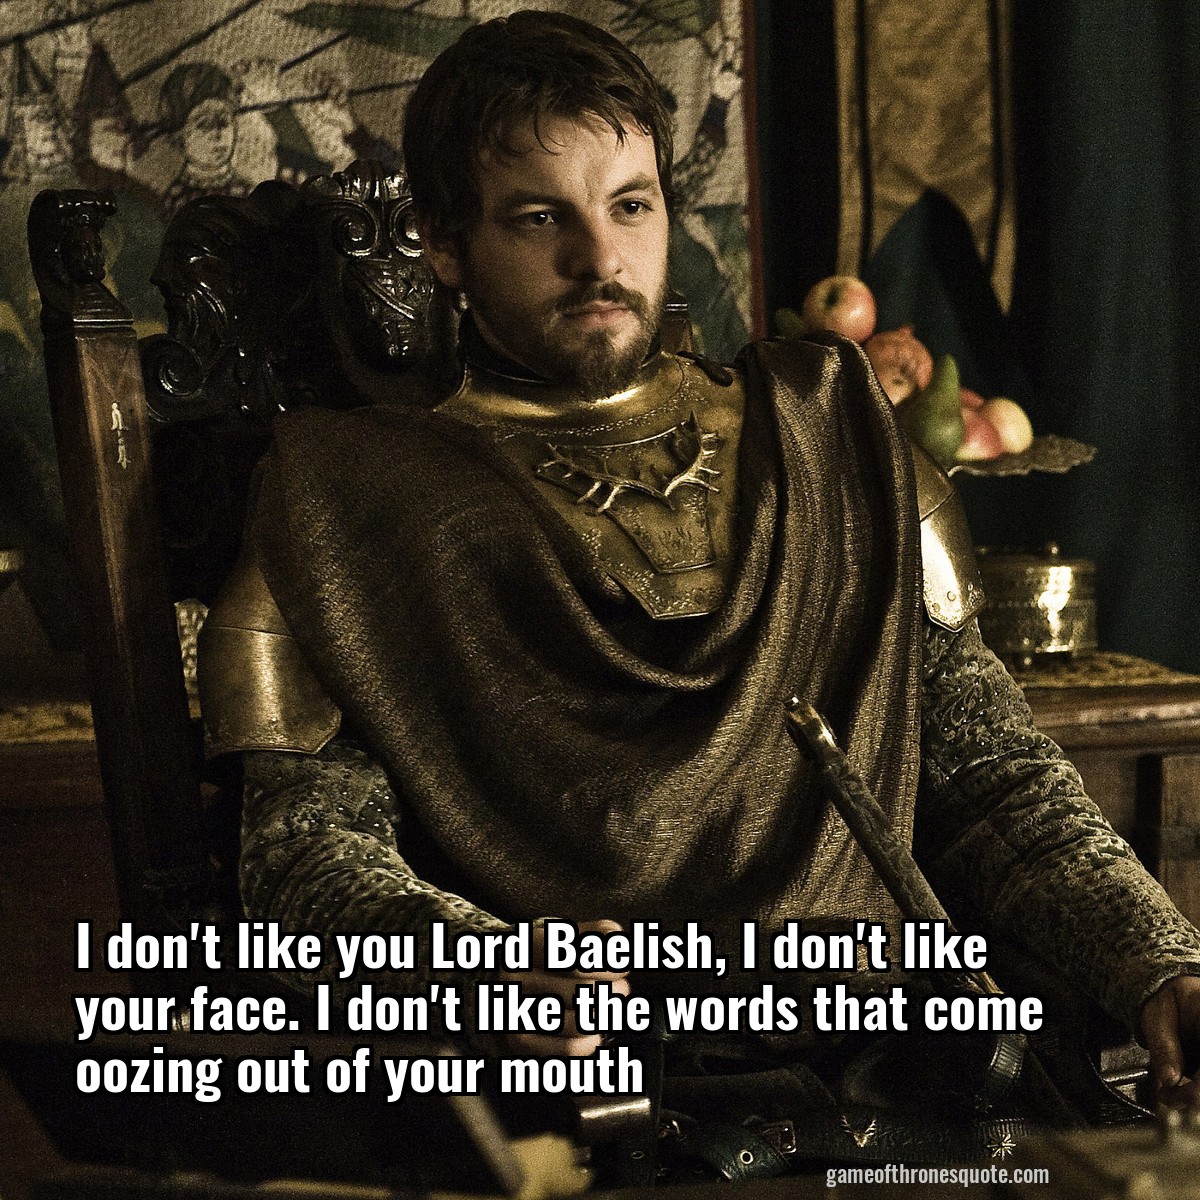 I don't like you Lord Baelish, I don't like your face. I don't like the words that come oozing out of your mouth